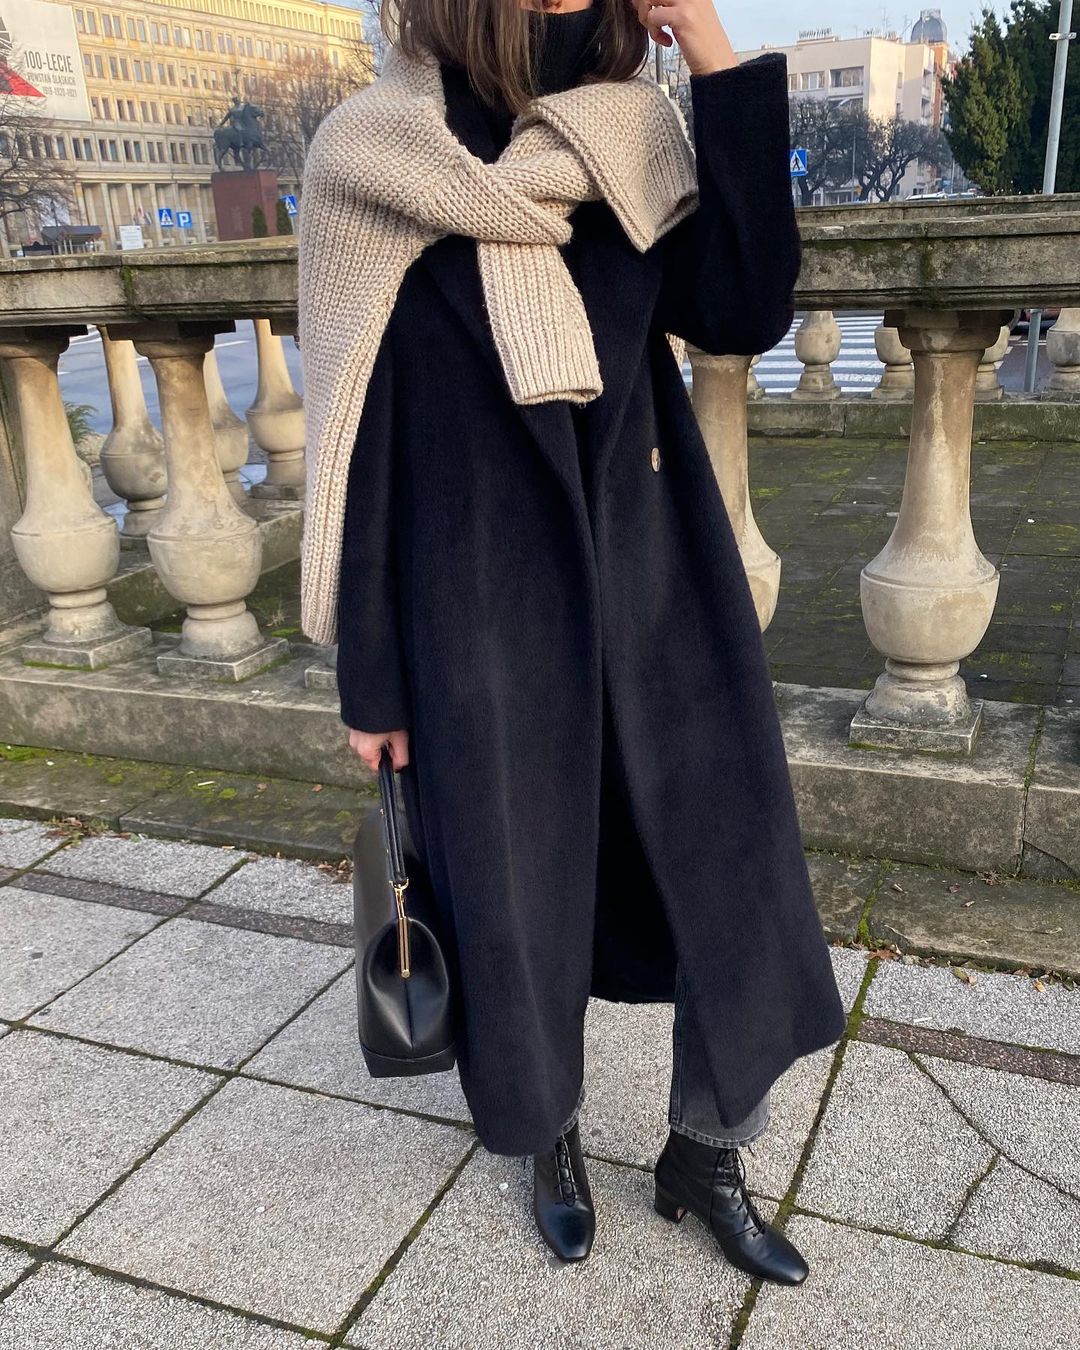 Chic Winter Outfit Idea — Instagram Style From @jestem_kasia Kasia Szymków in with Long Black Coat, Beige Sweater Tied Over The Shoulders, Faded Black Jeans, and Square Toe Boots